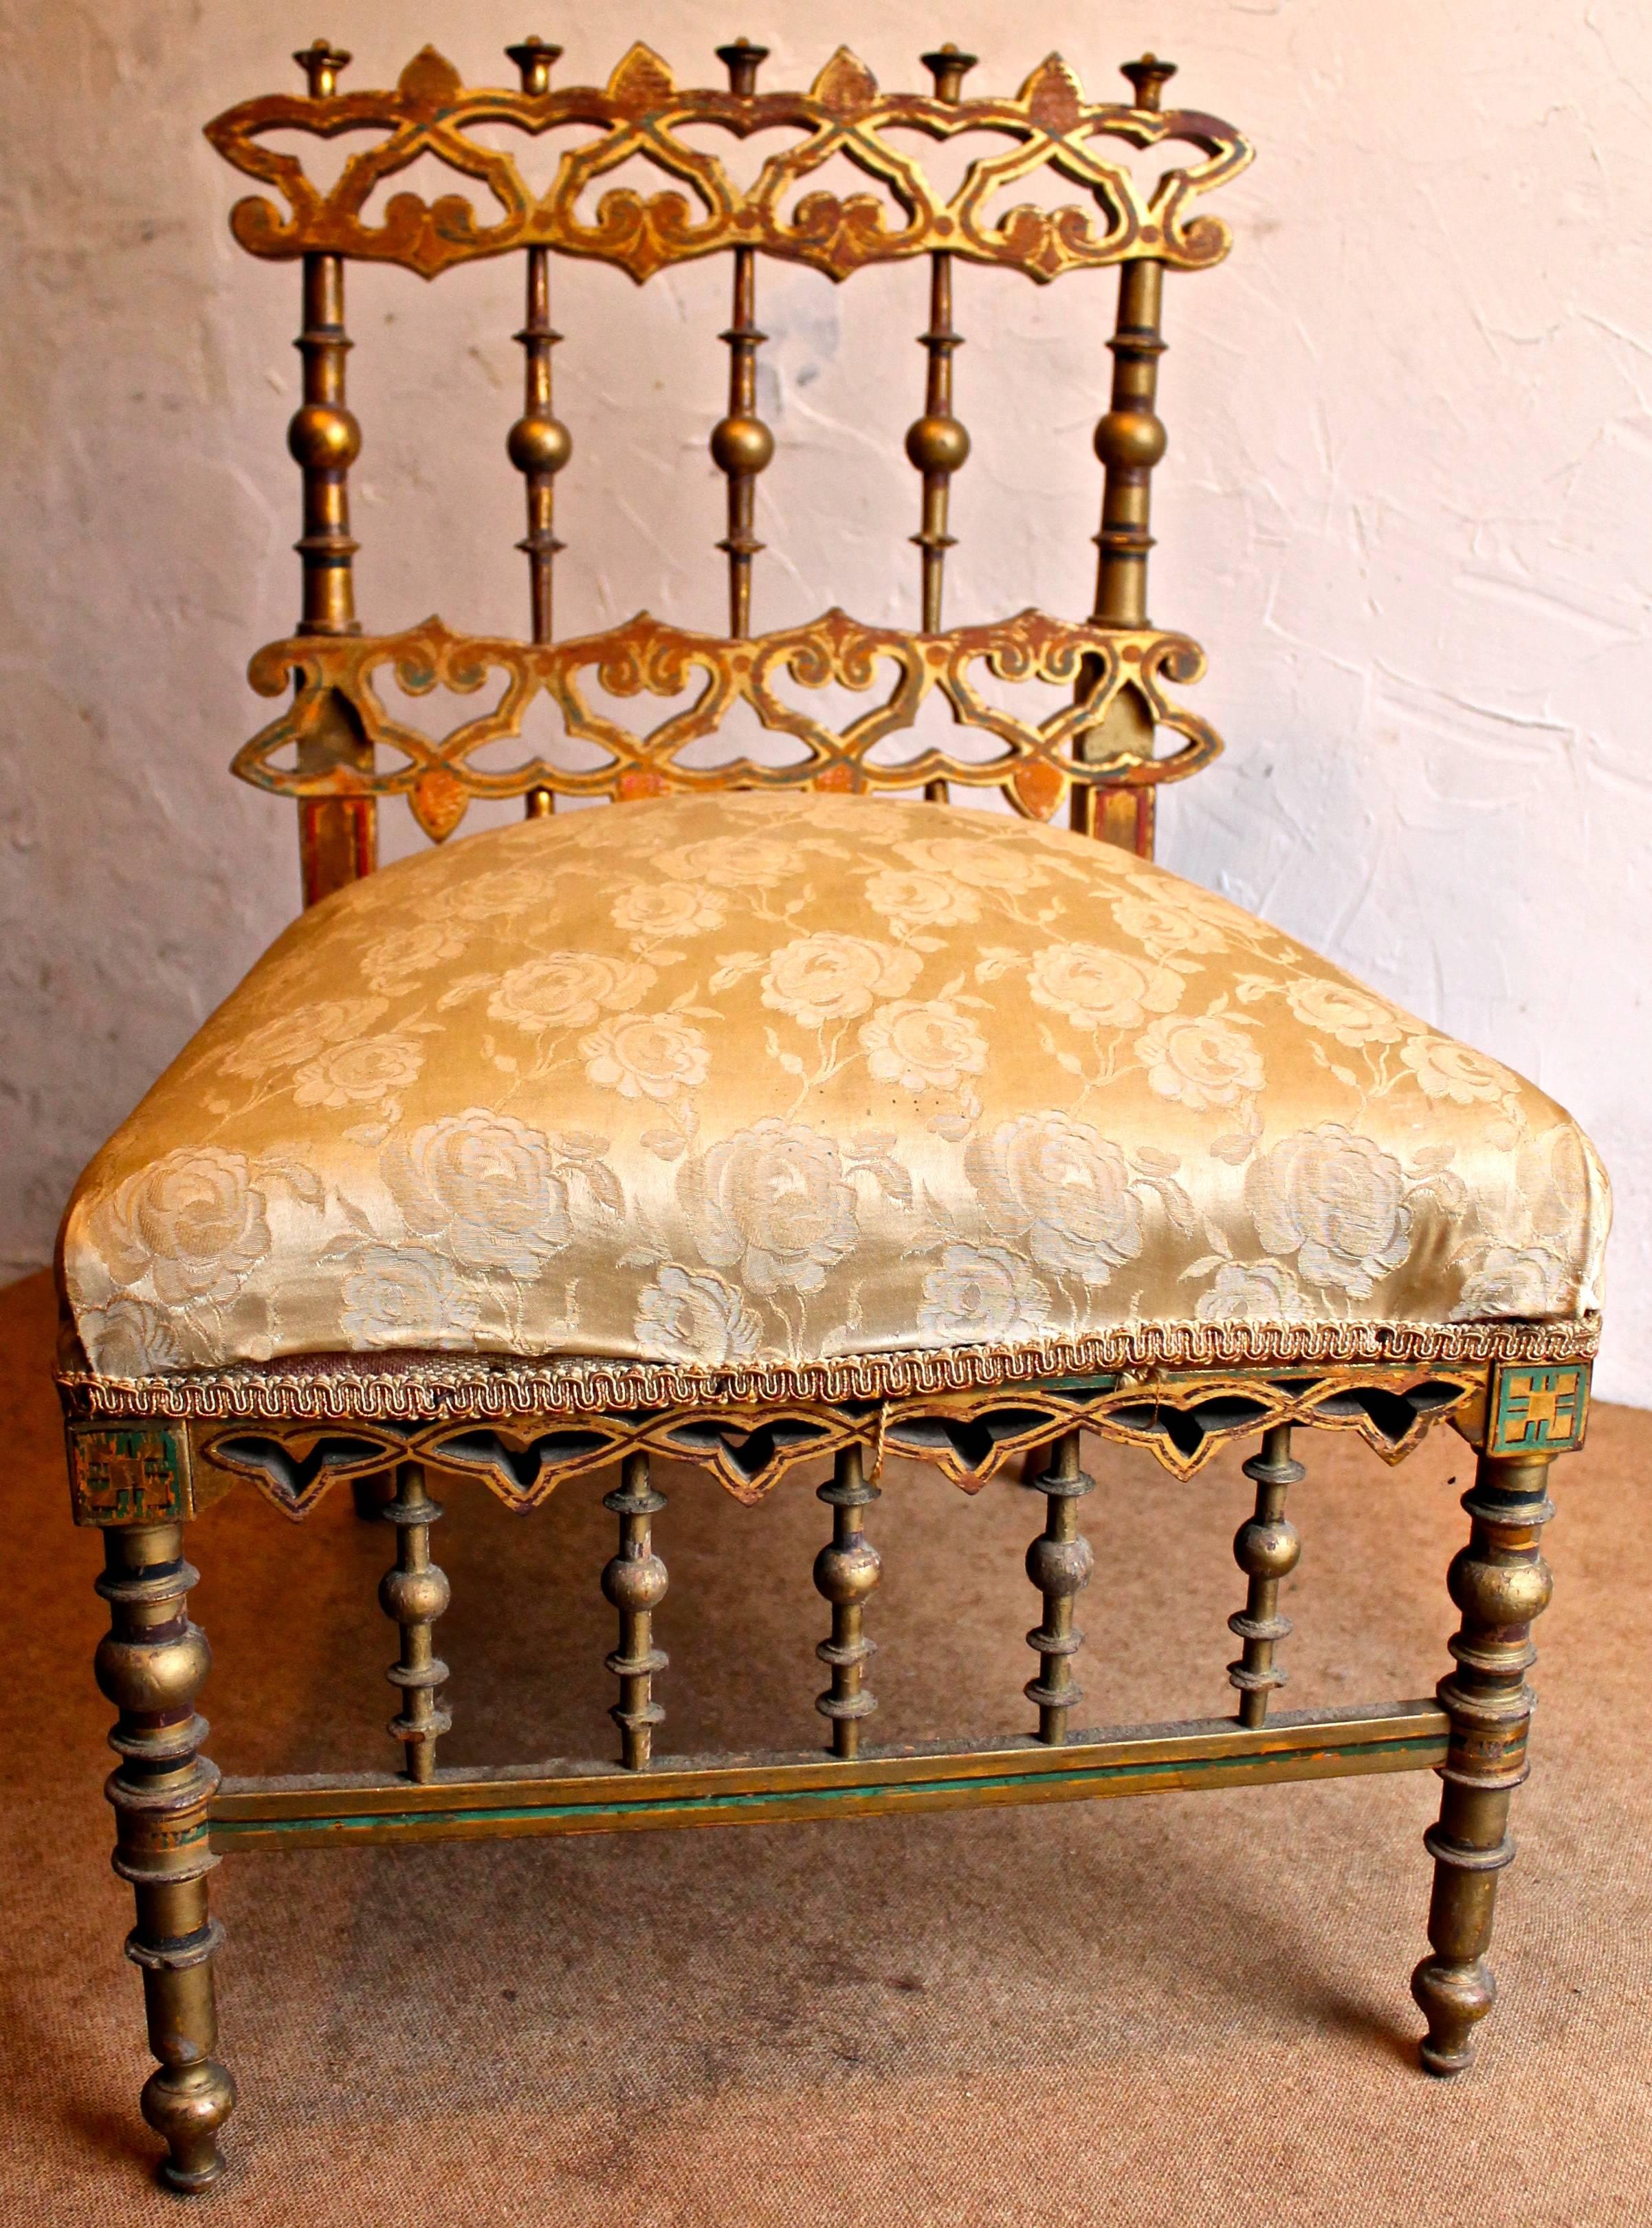 A Russian/Orientalist inspired proto aesthetic movement slipper chair from the Napoleon III (1852-1870) period.